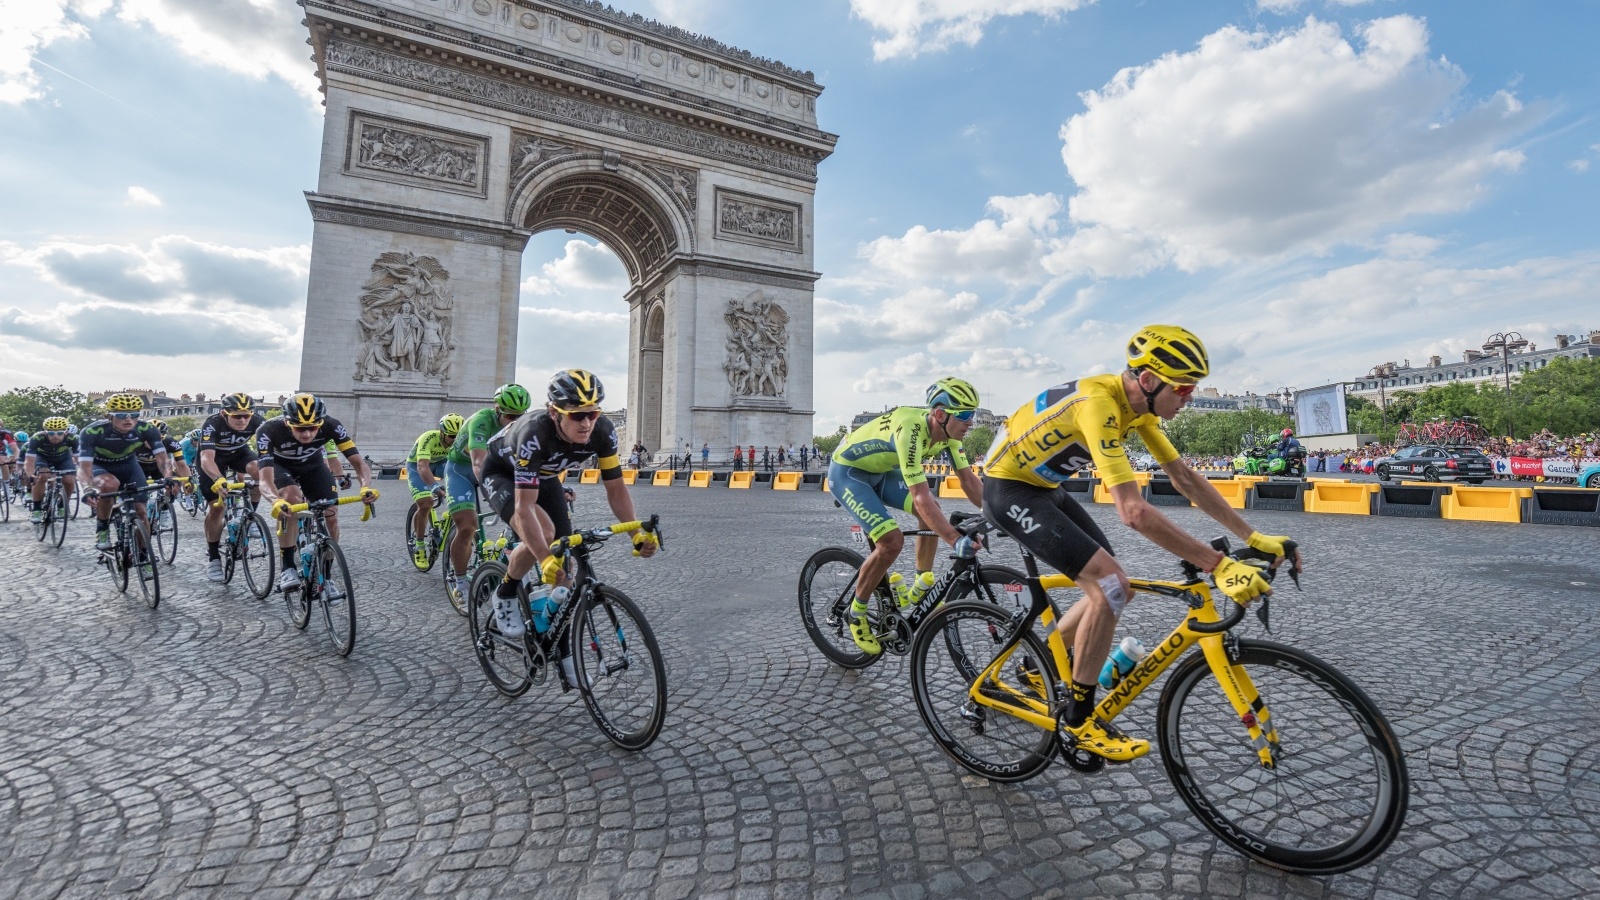 Christopher Froome, in yellow jersey, in front of Arc de Triomphe during the Tour de France 2016. Photo by Frederic Legrand via Shutterstock.com